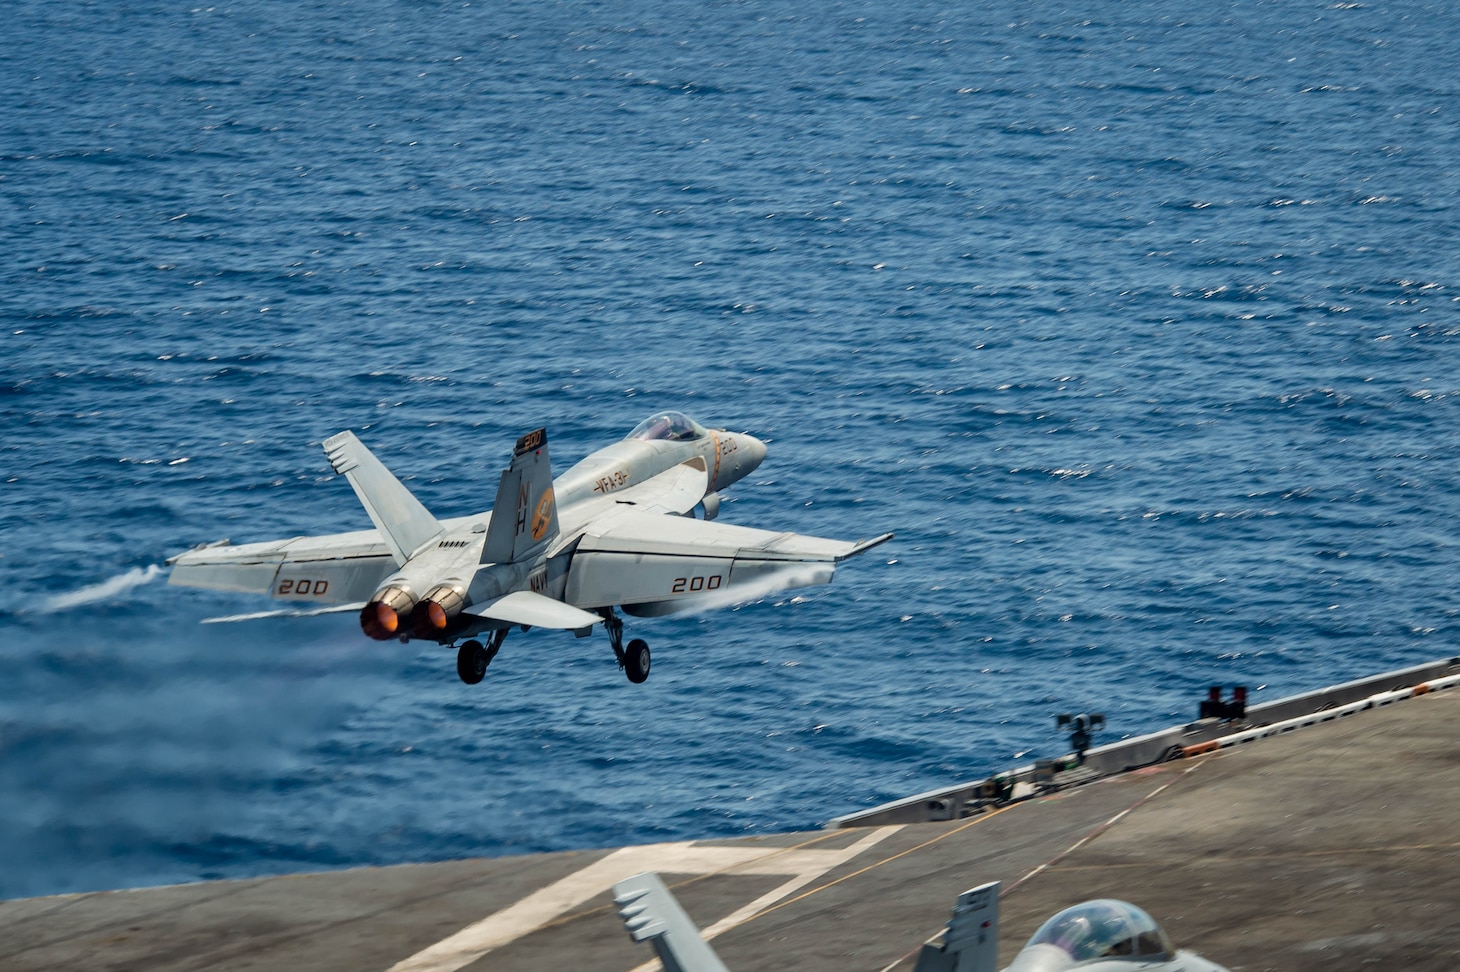 An F/A-18E Super Hornet, assigned to the “Tomcatters” of Strike Fighter Squadron (VFA) 31, launches from the flight deck of the aircraft carrier USS Theodore Roosevelt (CVN 71) April 6, 2021. The Theodore Roosevelt Carrier Strike Group is on a scheduled deployment to the U.S. 7th Fleet area of operations. As the U.S. Navy’s largest forward-deployed fleet, 7th Fleet routinely operates and interacts with 35 maritime nations while conducting missions to preserve and protect a free and open Indo-Pacific Region.